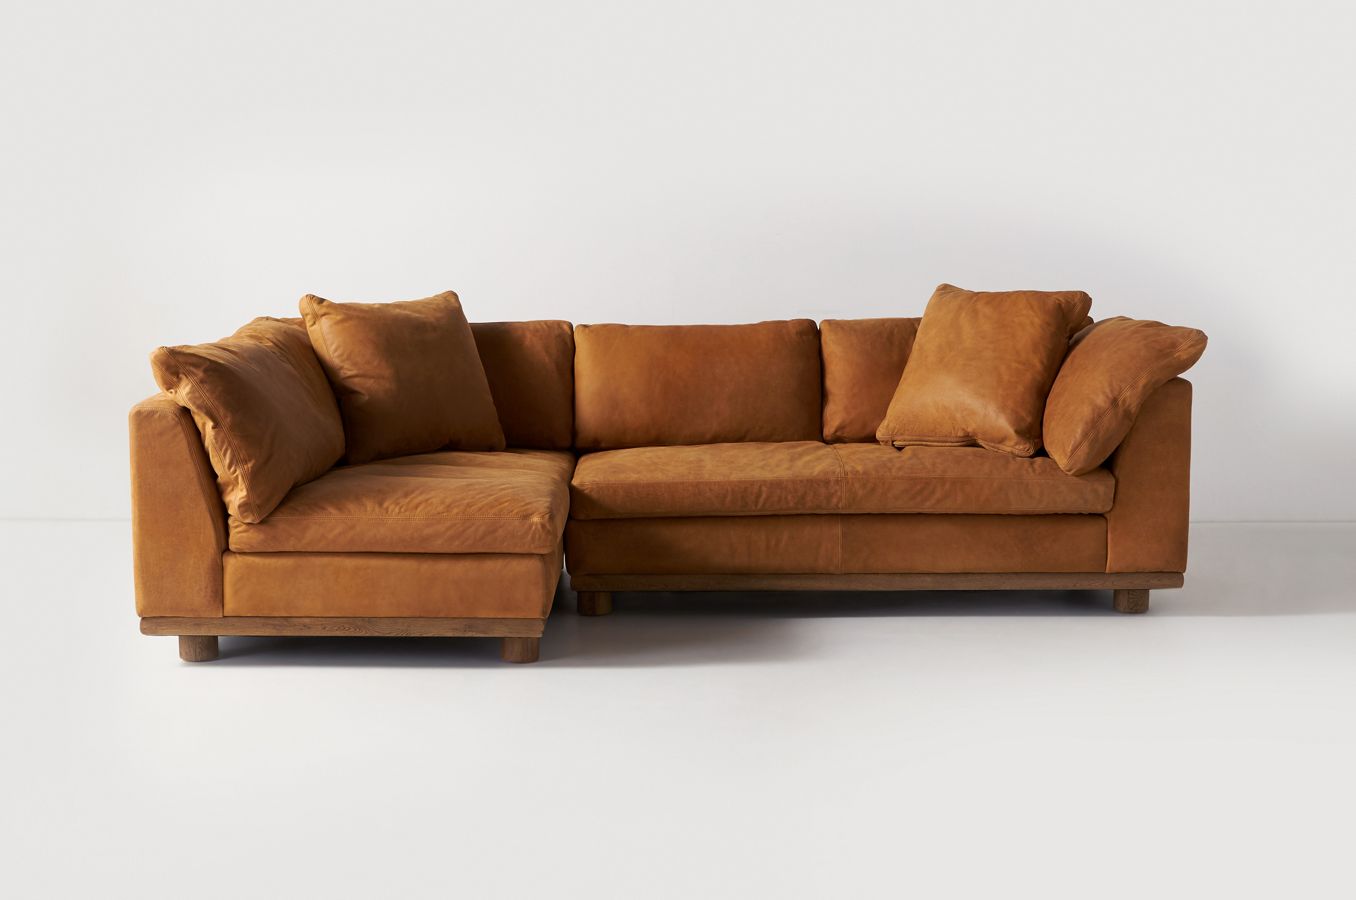 Relaxed Saguaro Leather Sectional | Anthropologie